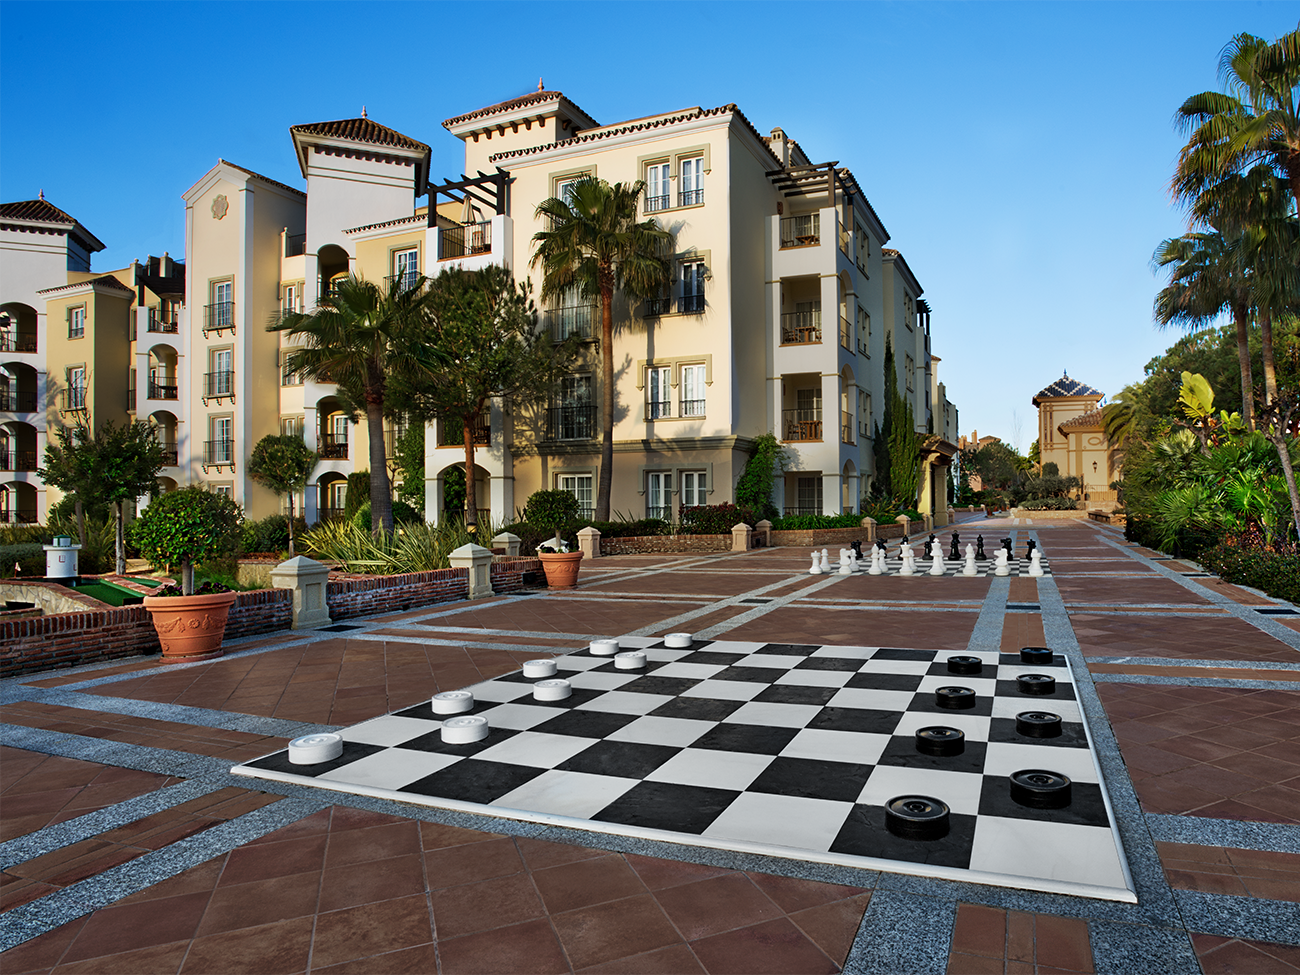 Giant Chess and Checker Boards